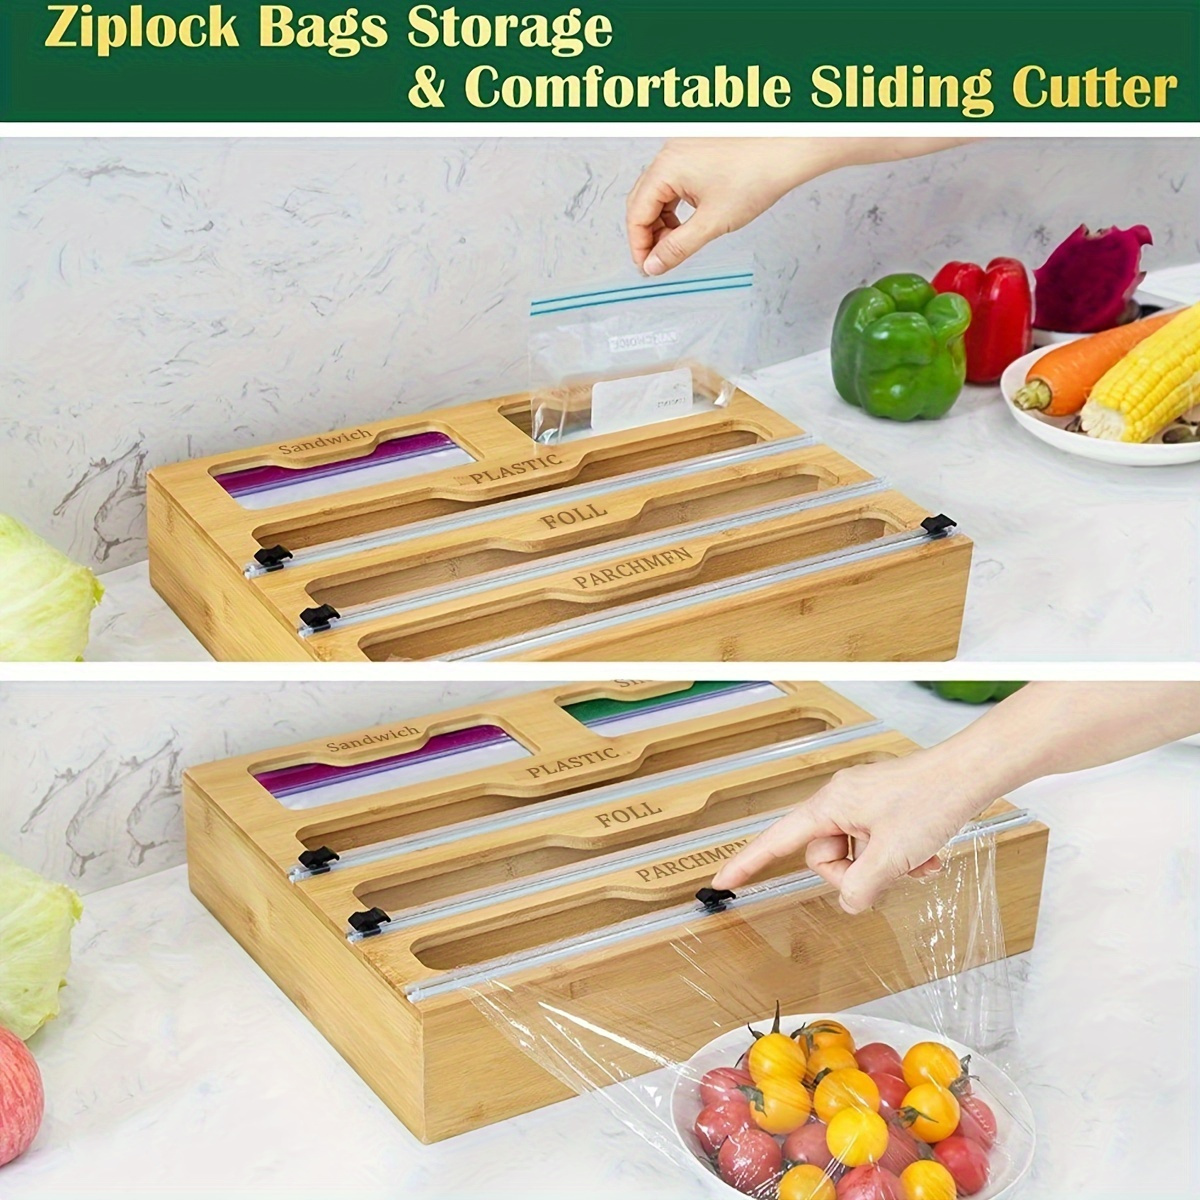 Bamboo 6 In 1 Foil and Plastic Wrap Organizer, Ziplock Bag Organizer/Holder  Wrap Dispenser With Slide Cutter, for kitchen Drawer or House Wall Use